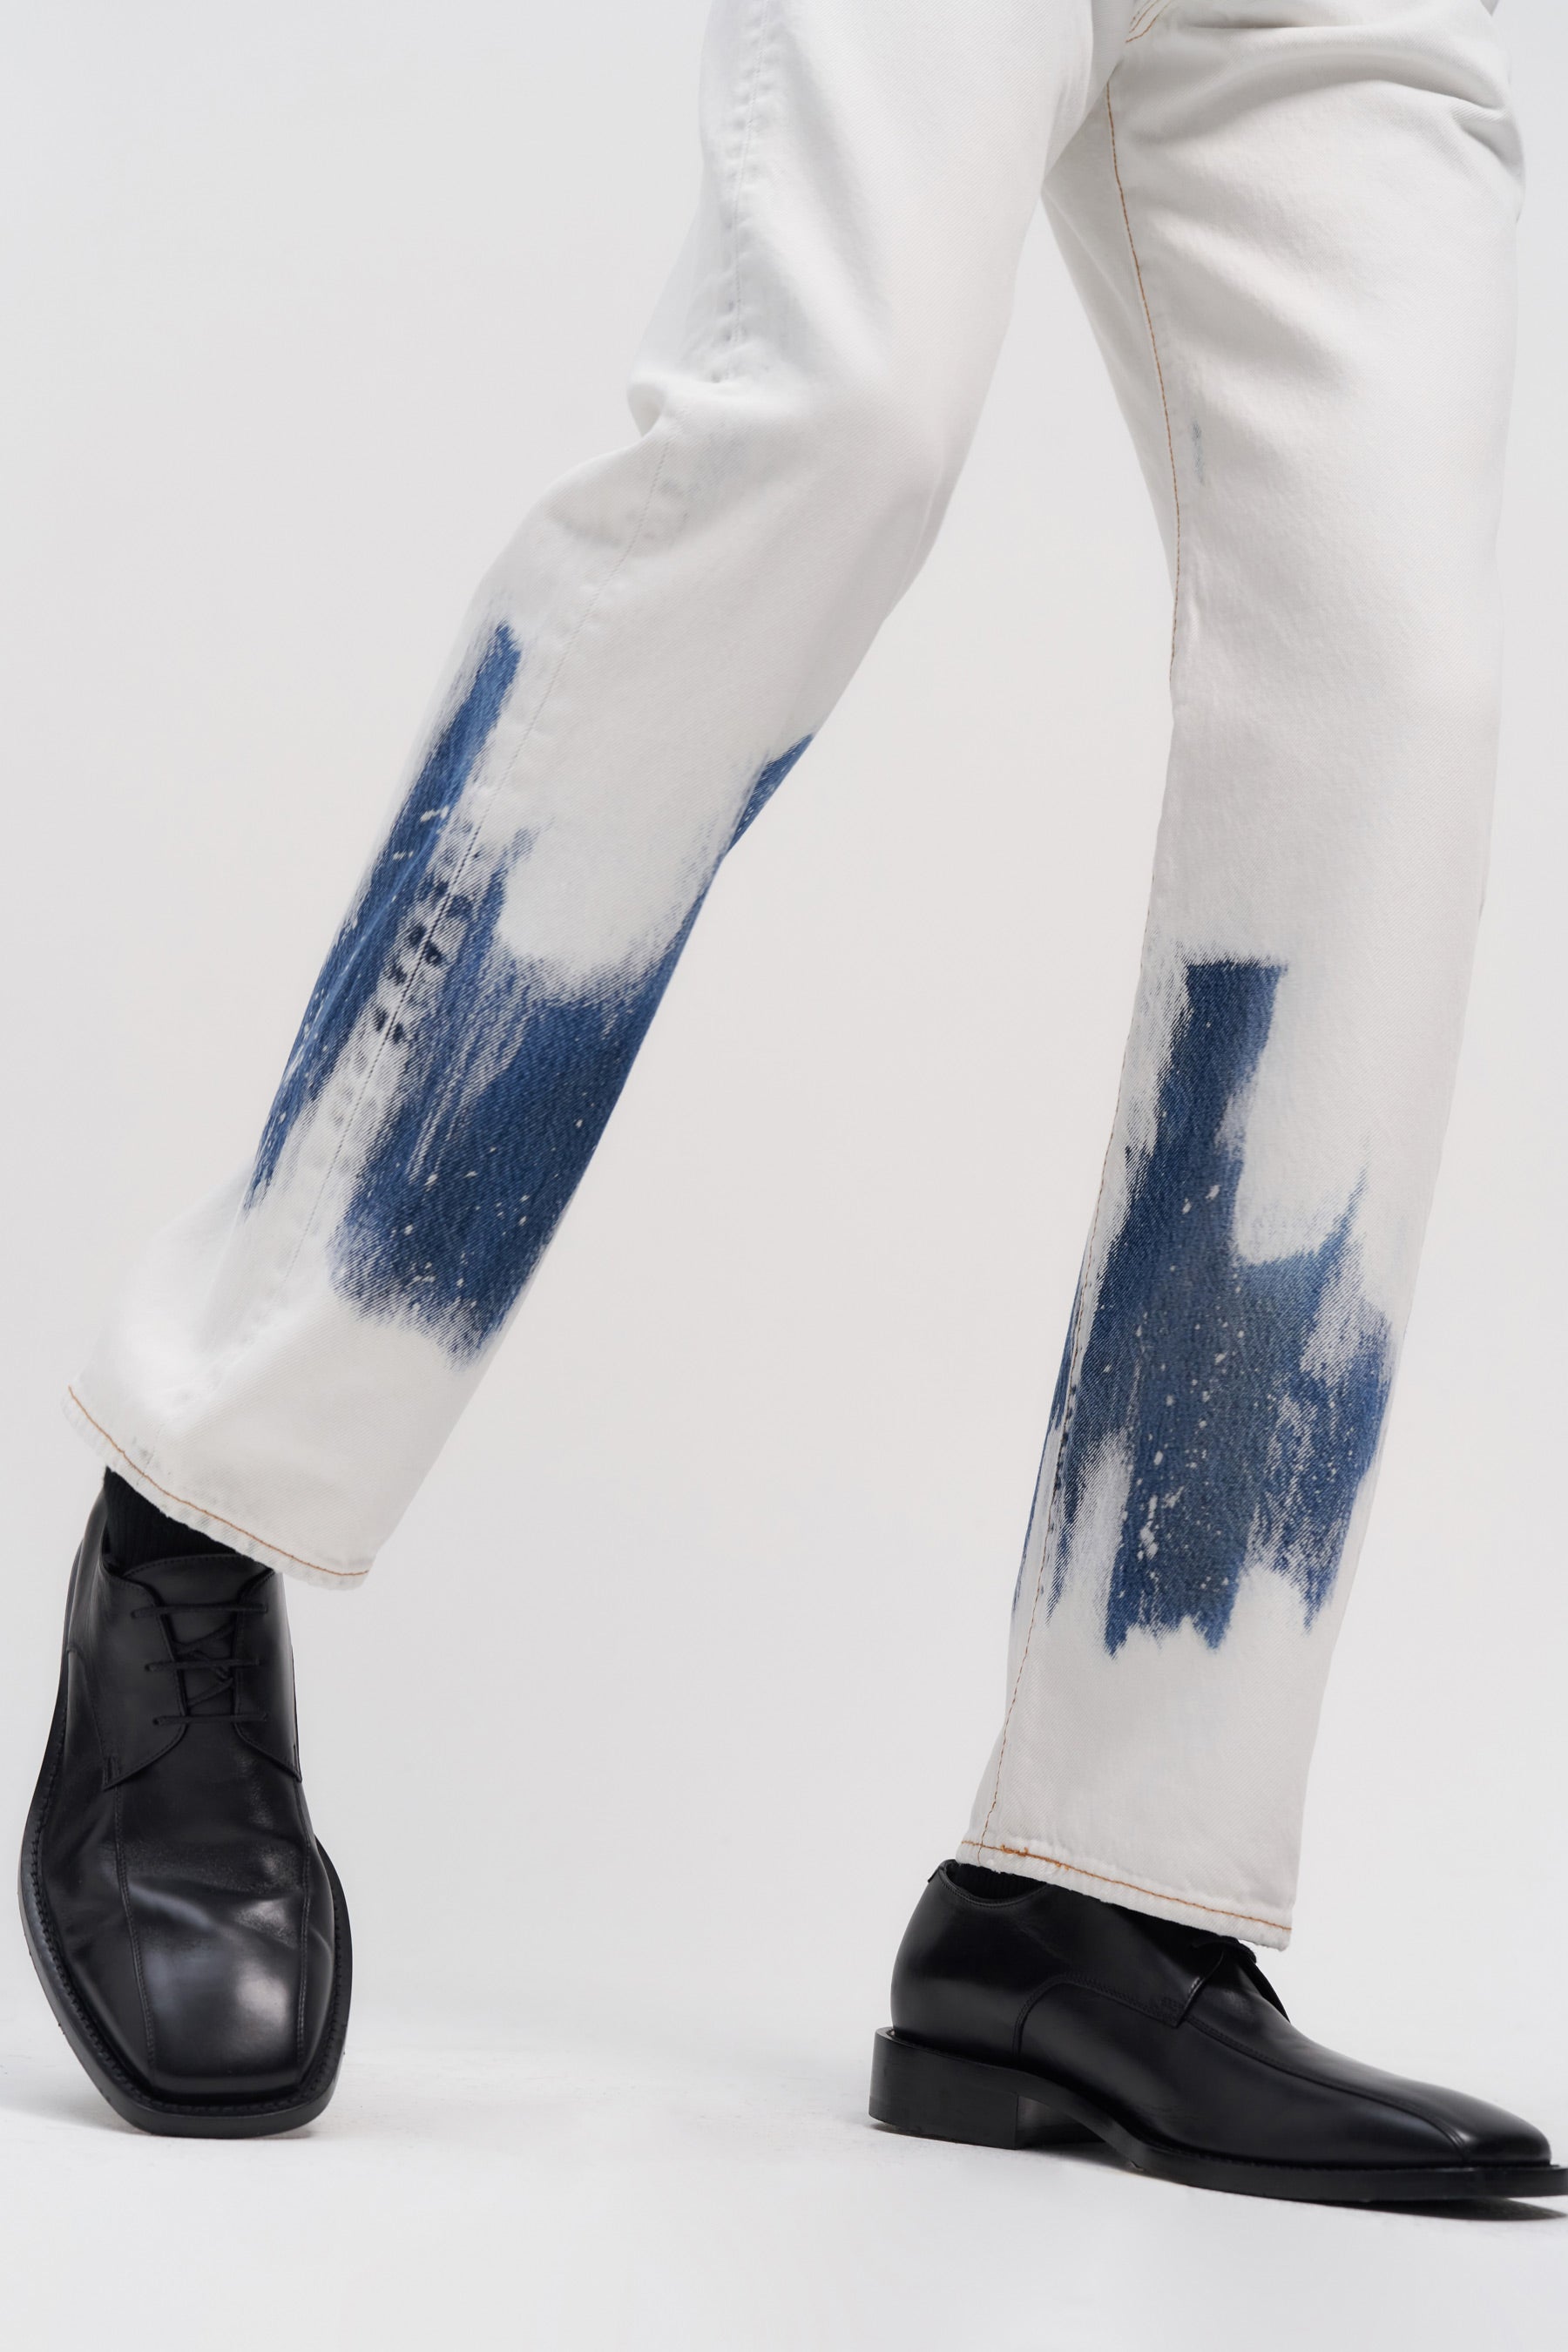 RE-edited Bleached Levi's 501 jeans